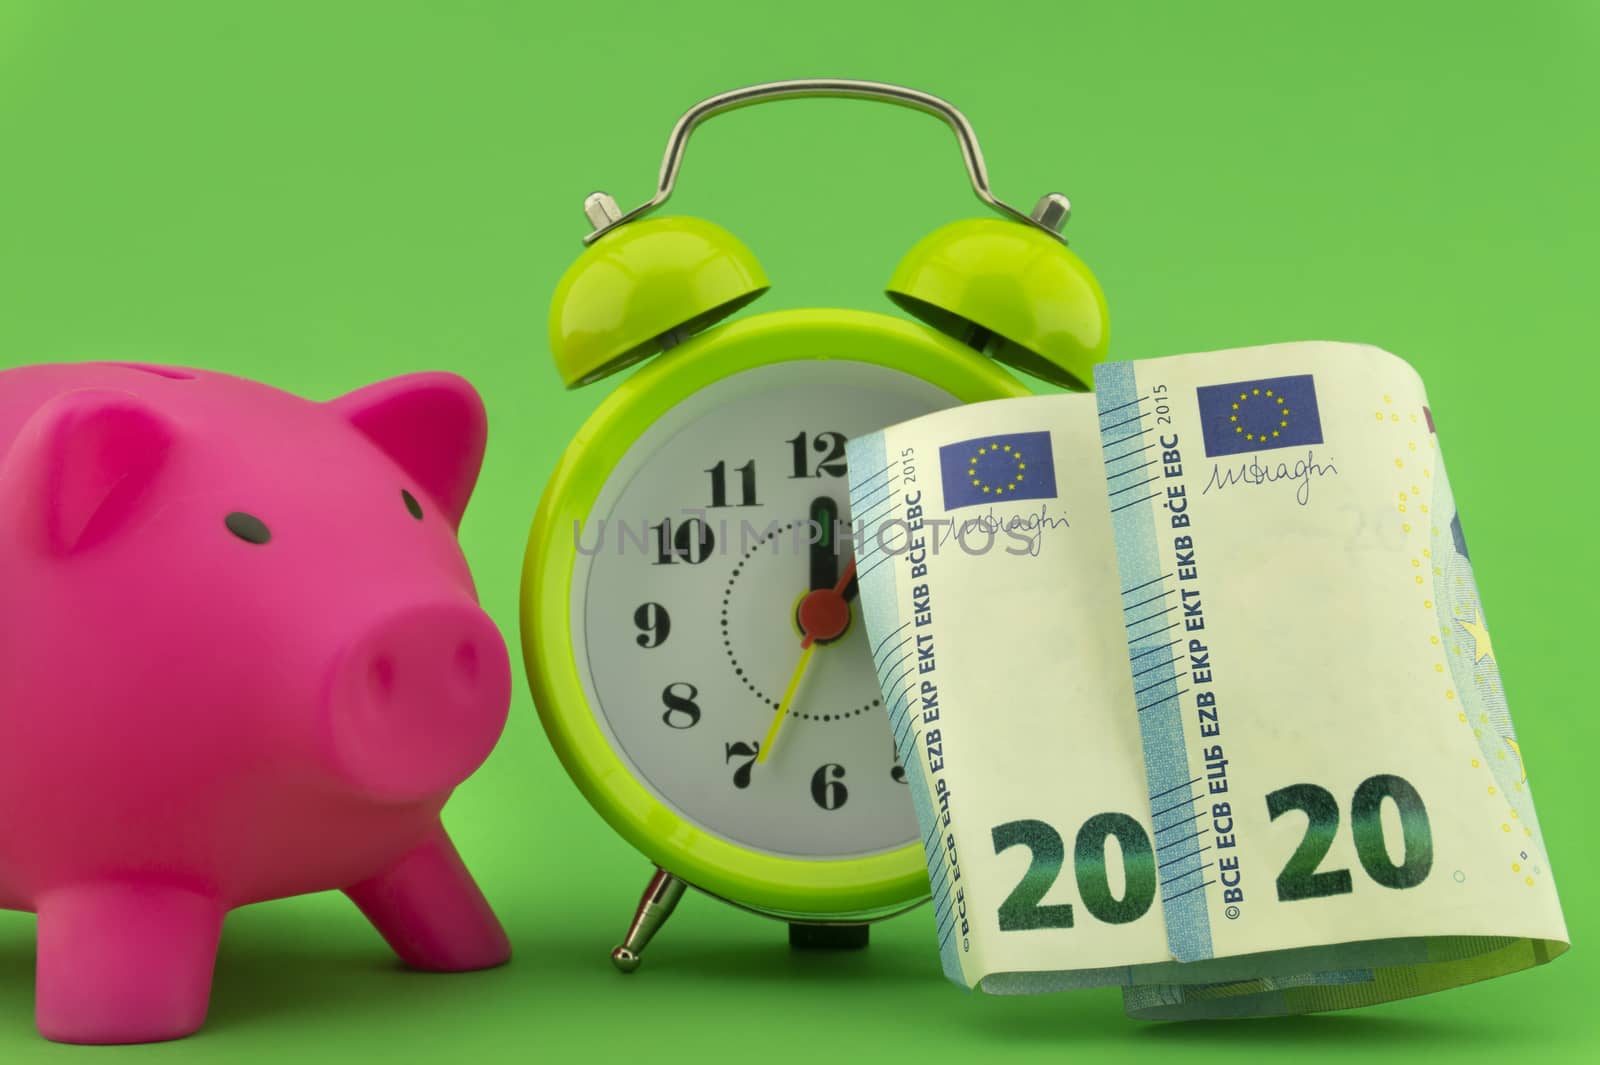 Time management and financial success concept with a 20 Euro bill alongside an alarm clock with piggy bank in the background over green